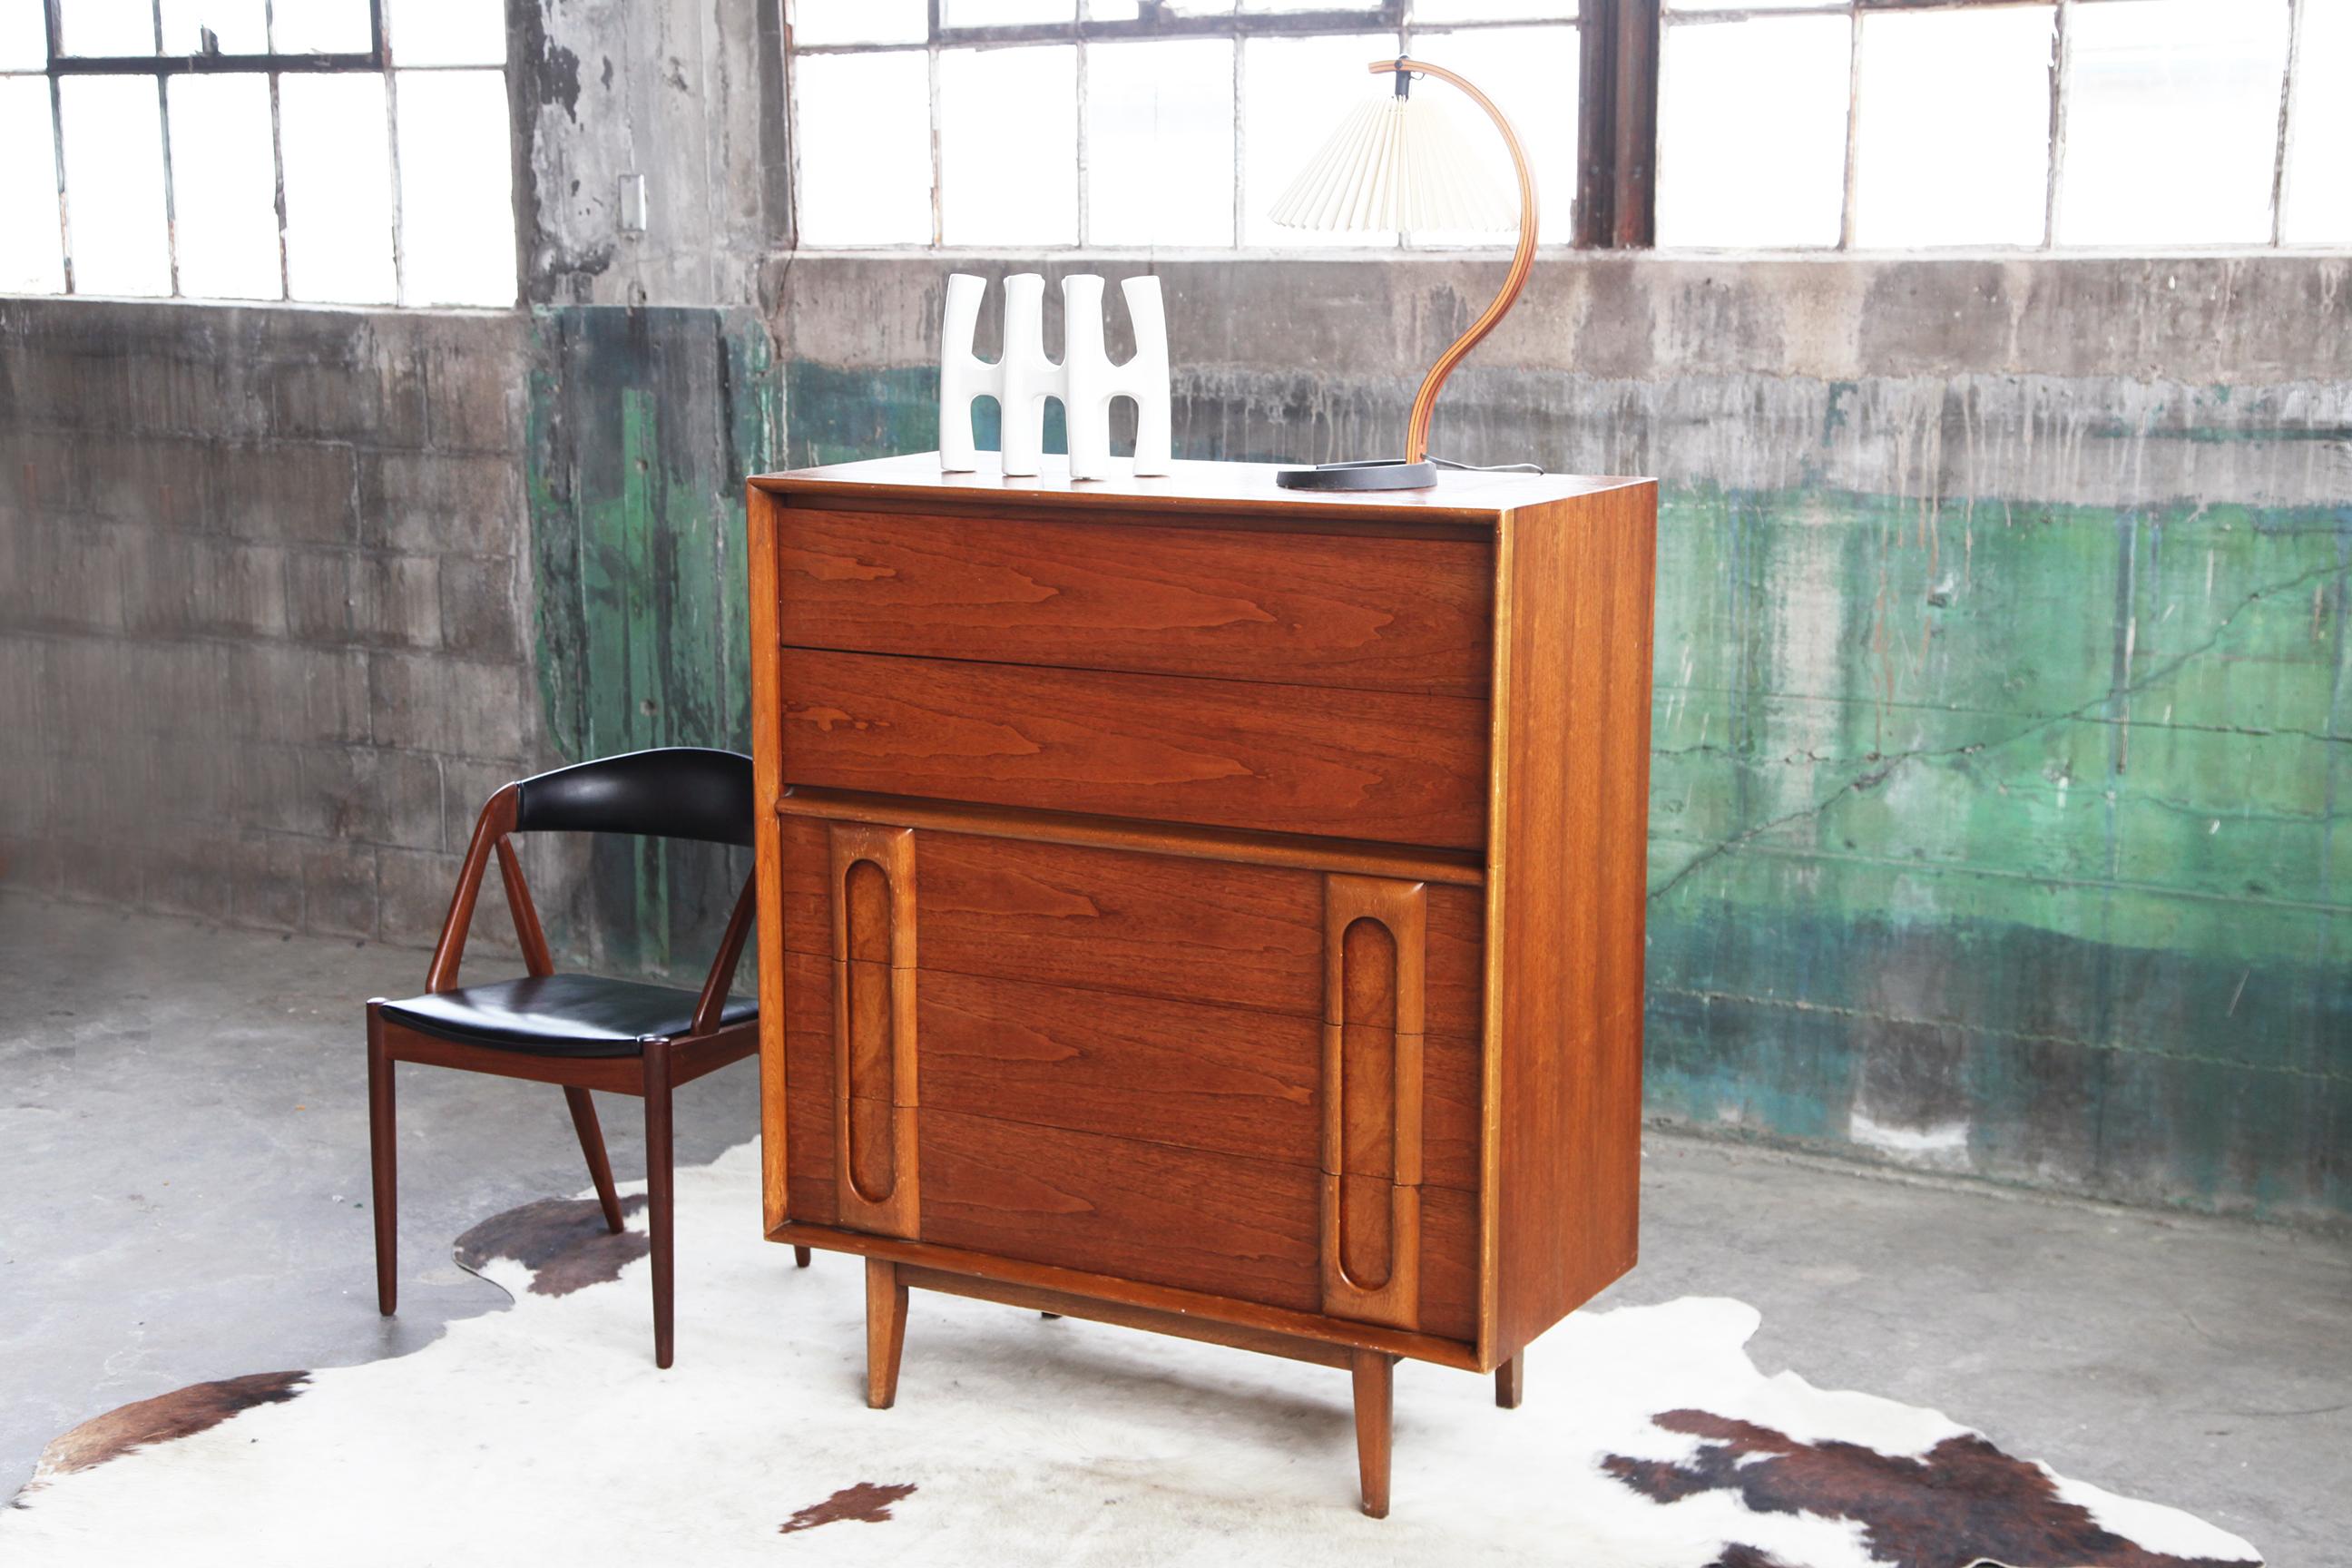 Ships from Madison WI USA warehouse.

This is a beautiful, top of the line, Original 1960's Lane Tall boy 5 drawer dresser. It features beautiful sculptural. hidden pulls, and it is easy to use them. This is just the kind of design we like to